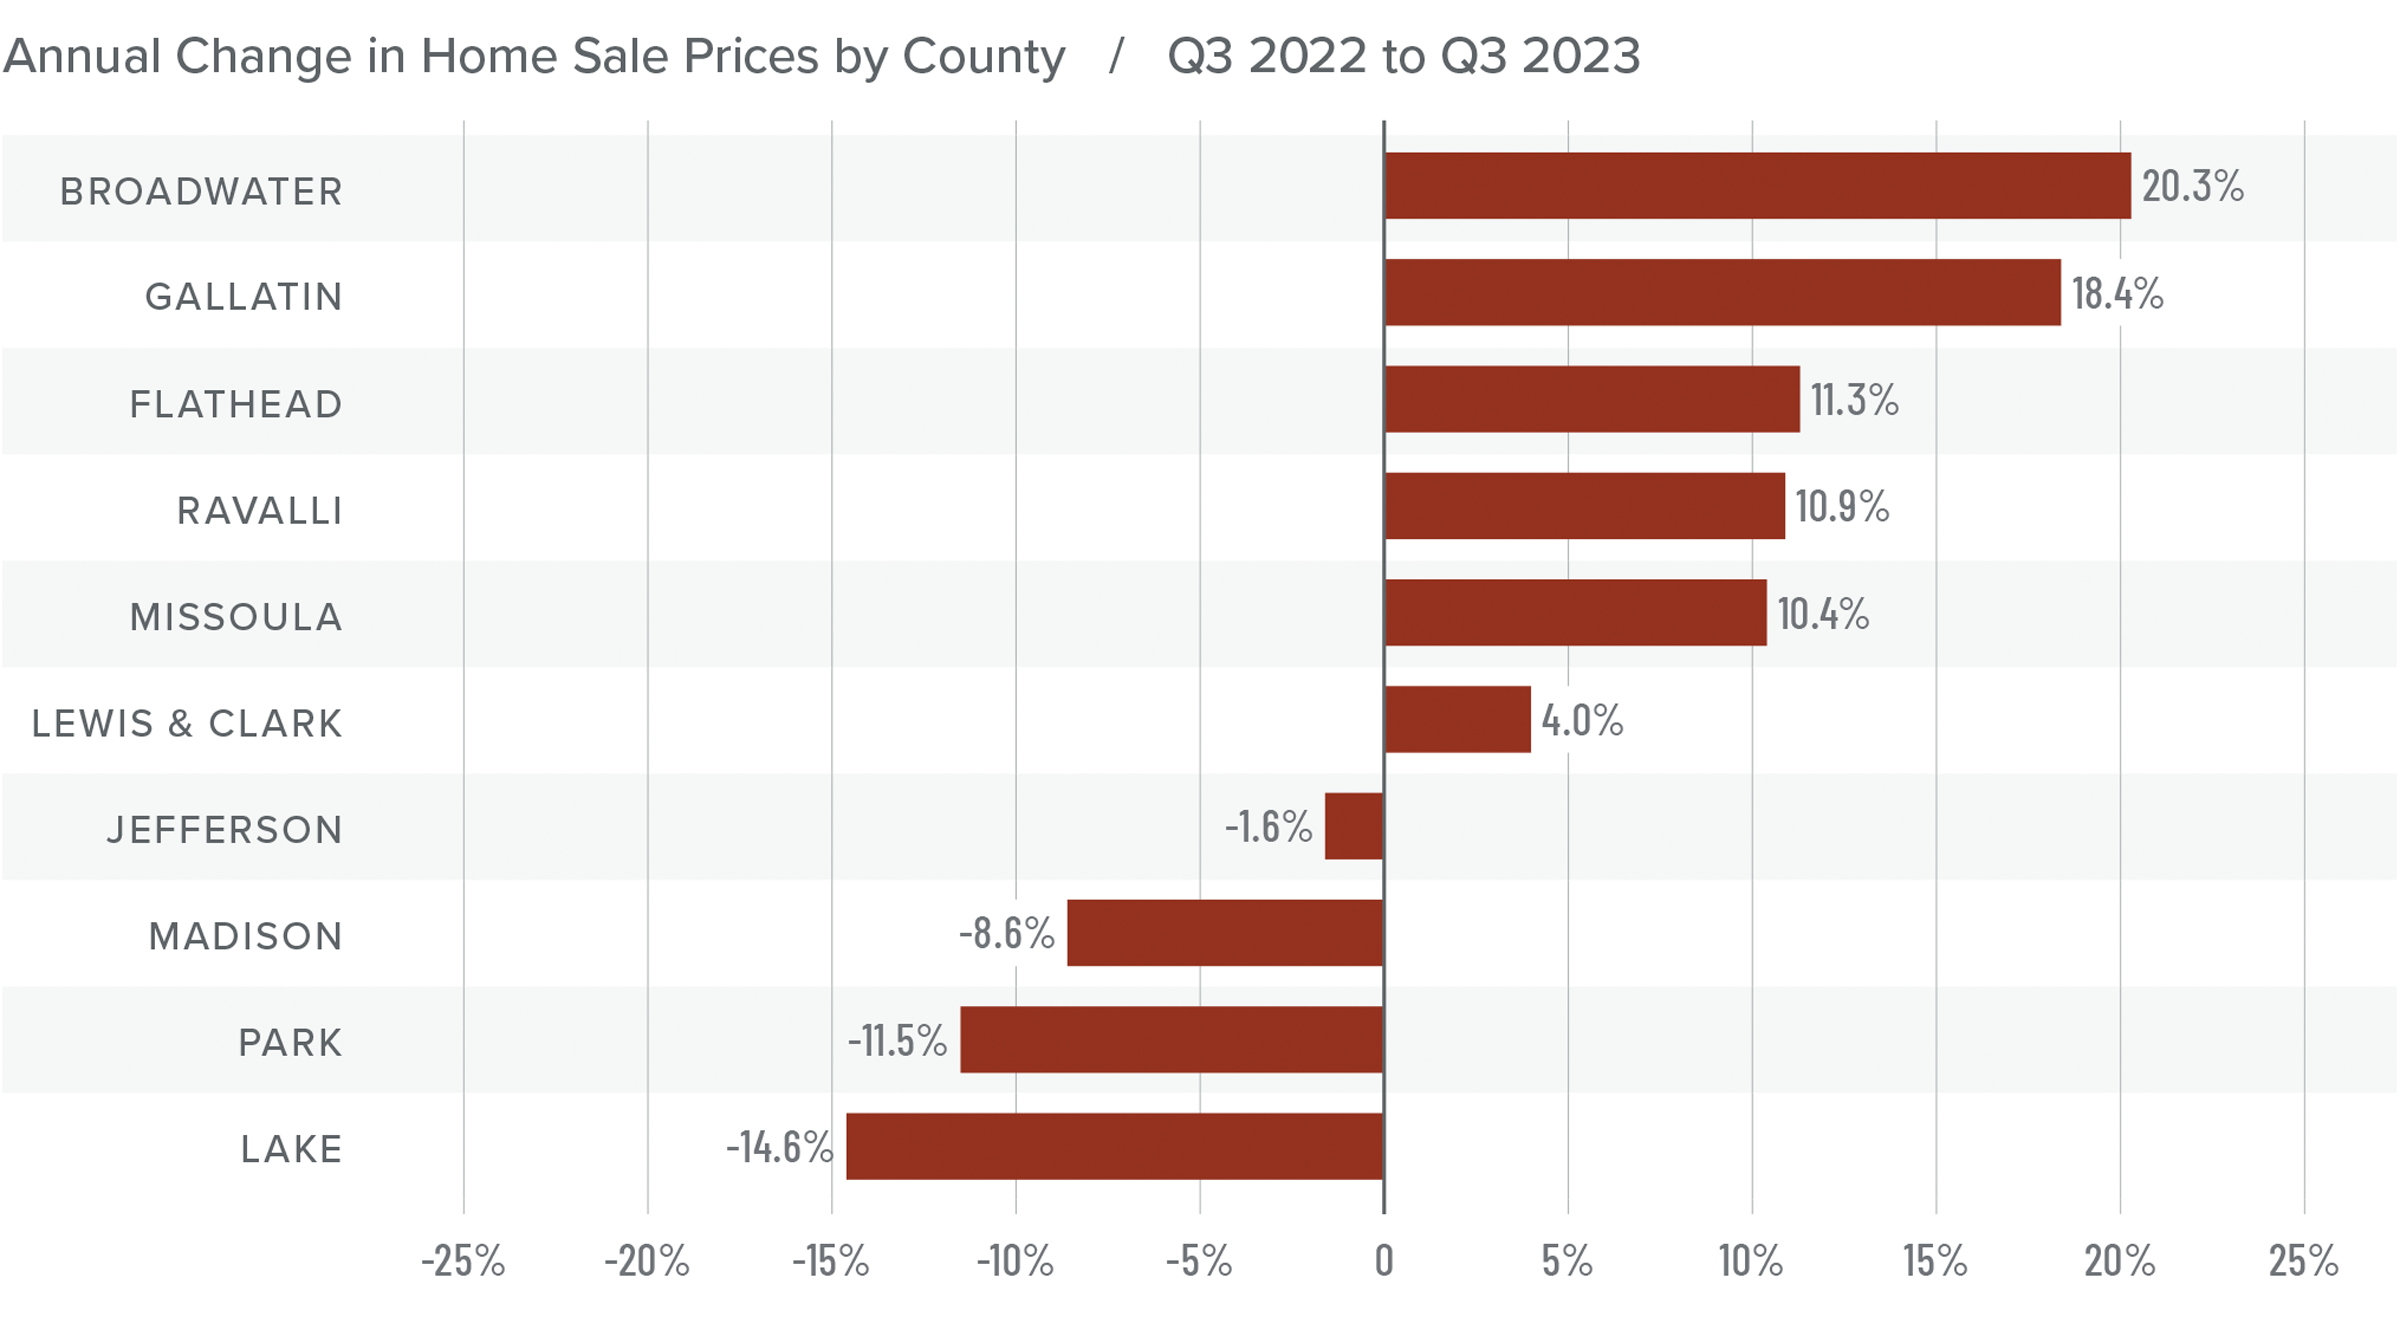 A bar graph showing the annual change in home sale prices by county in Montana from Q3 2022 to Q3 2023. Jefferson County had the least change at -1.6% while Lake had the greatest decrease of 14.6% and Broadwater had the greatest increase of 20.3%.